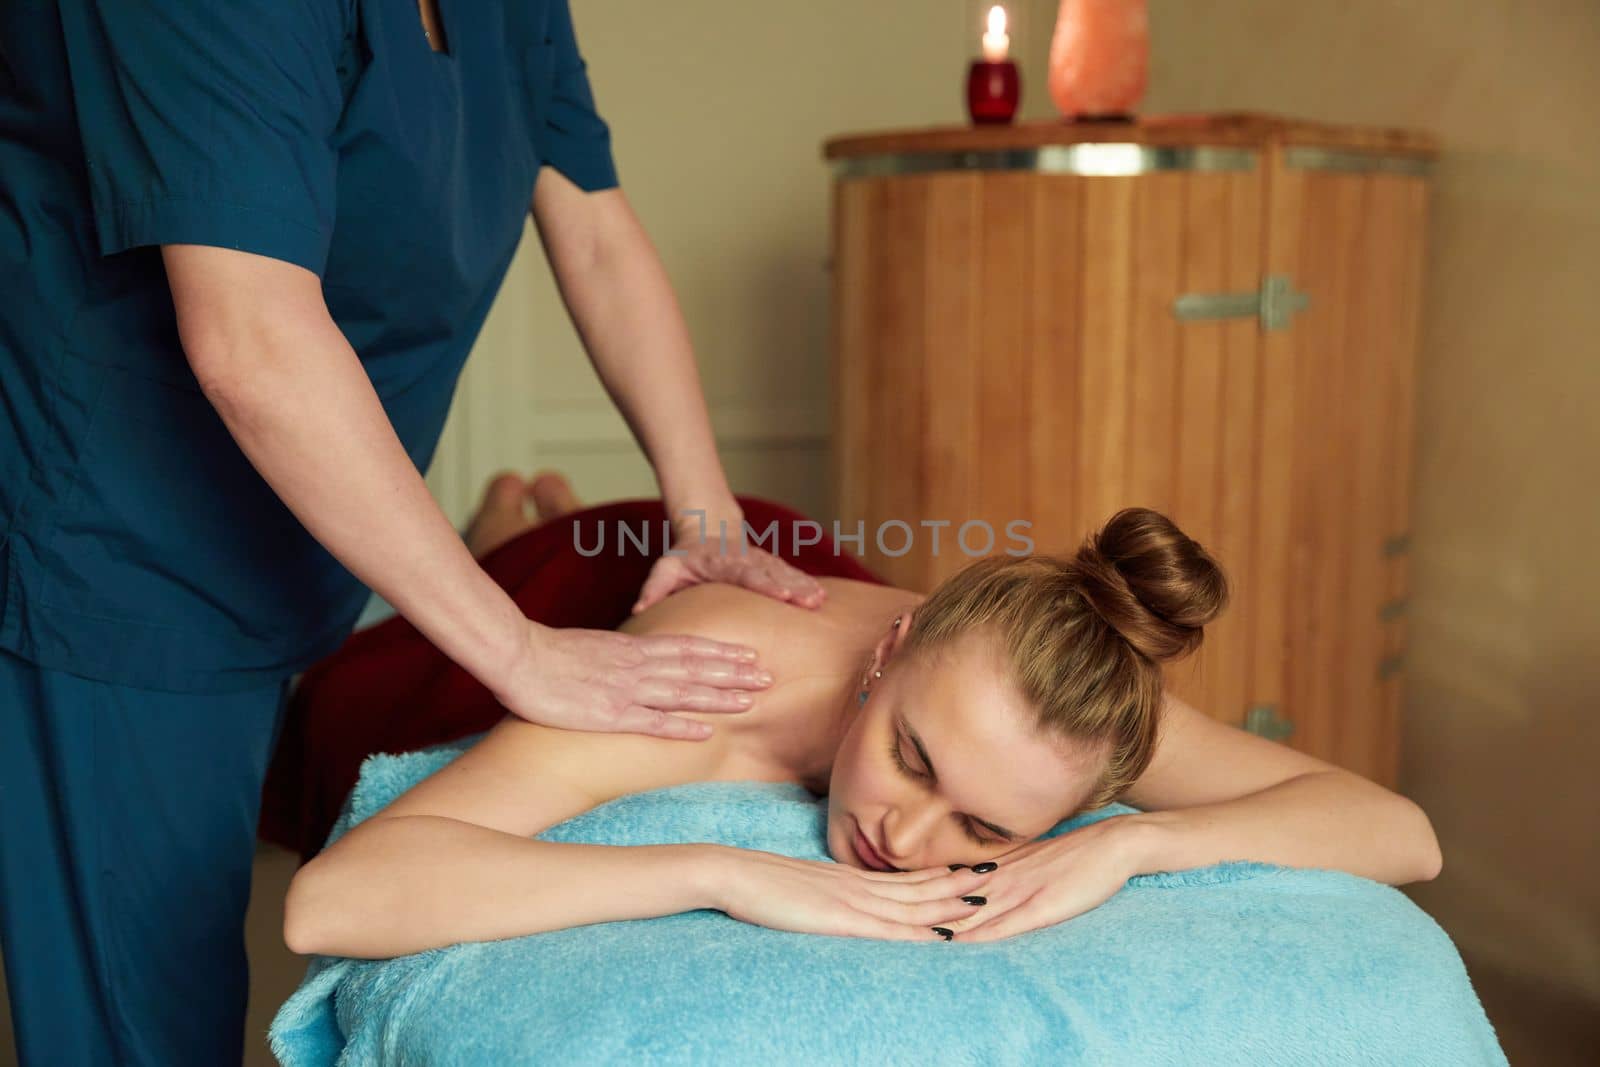 Young woman receiving massage in a spa salon